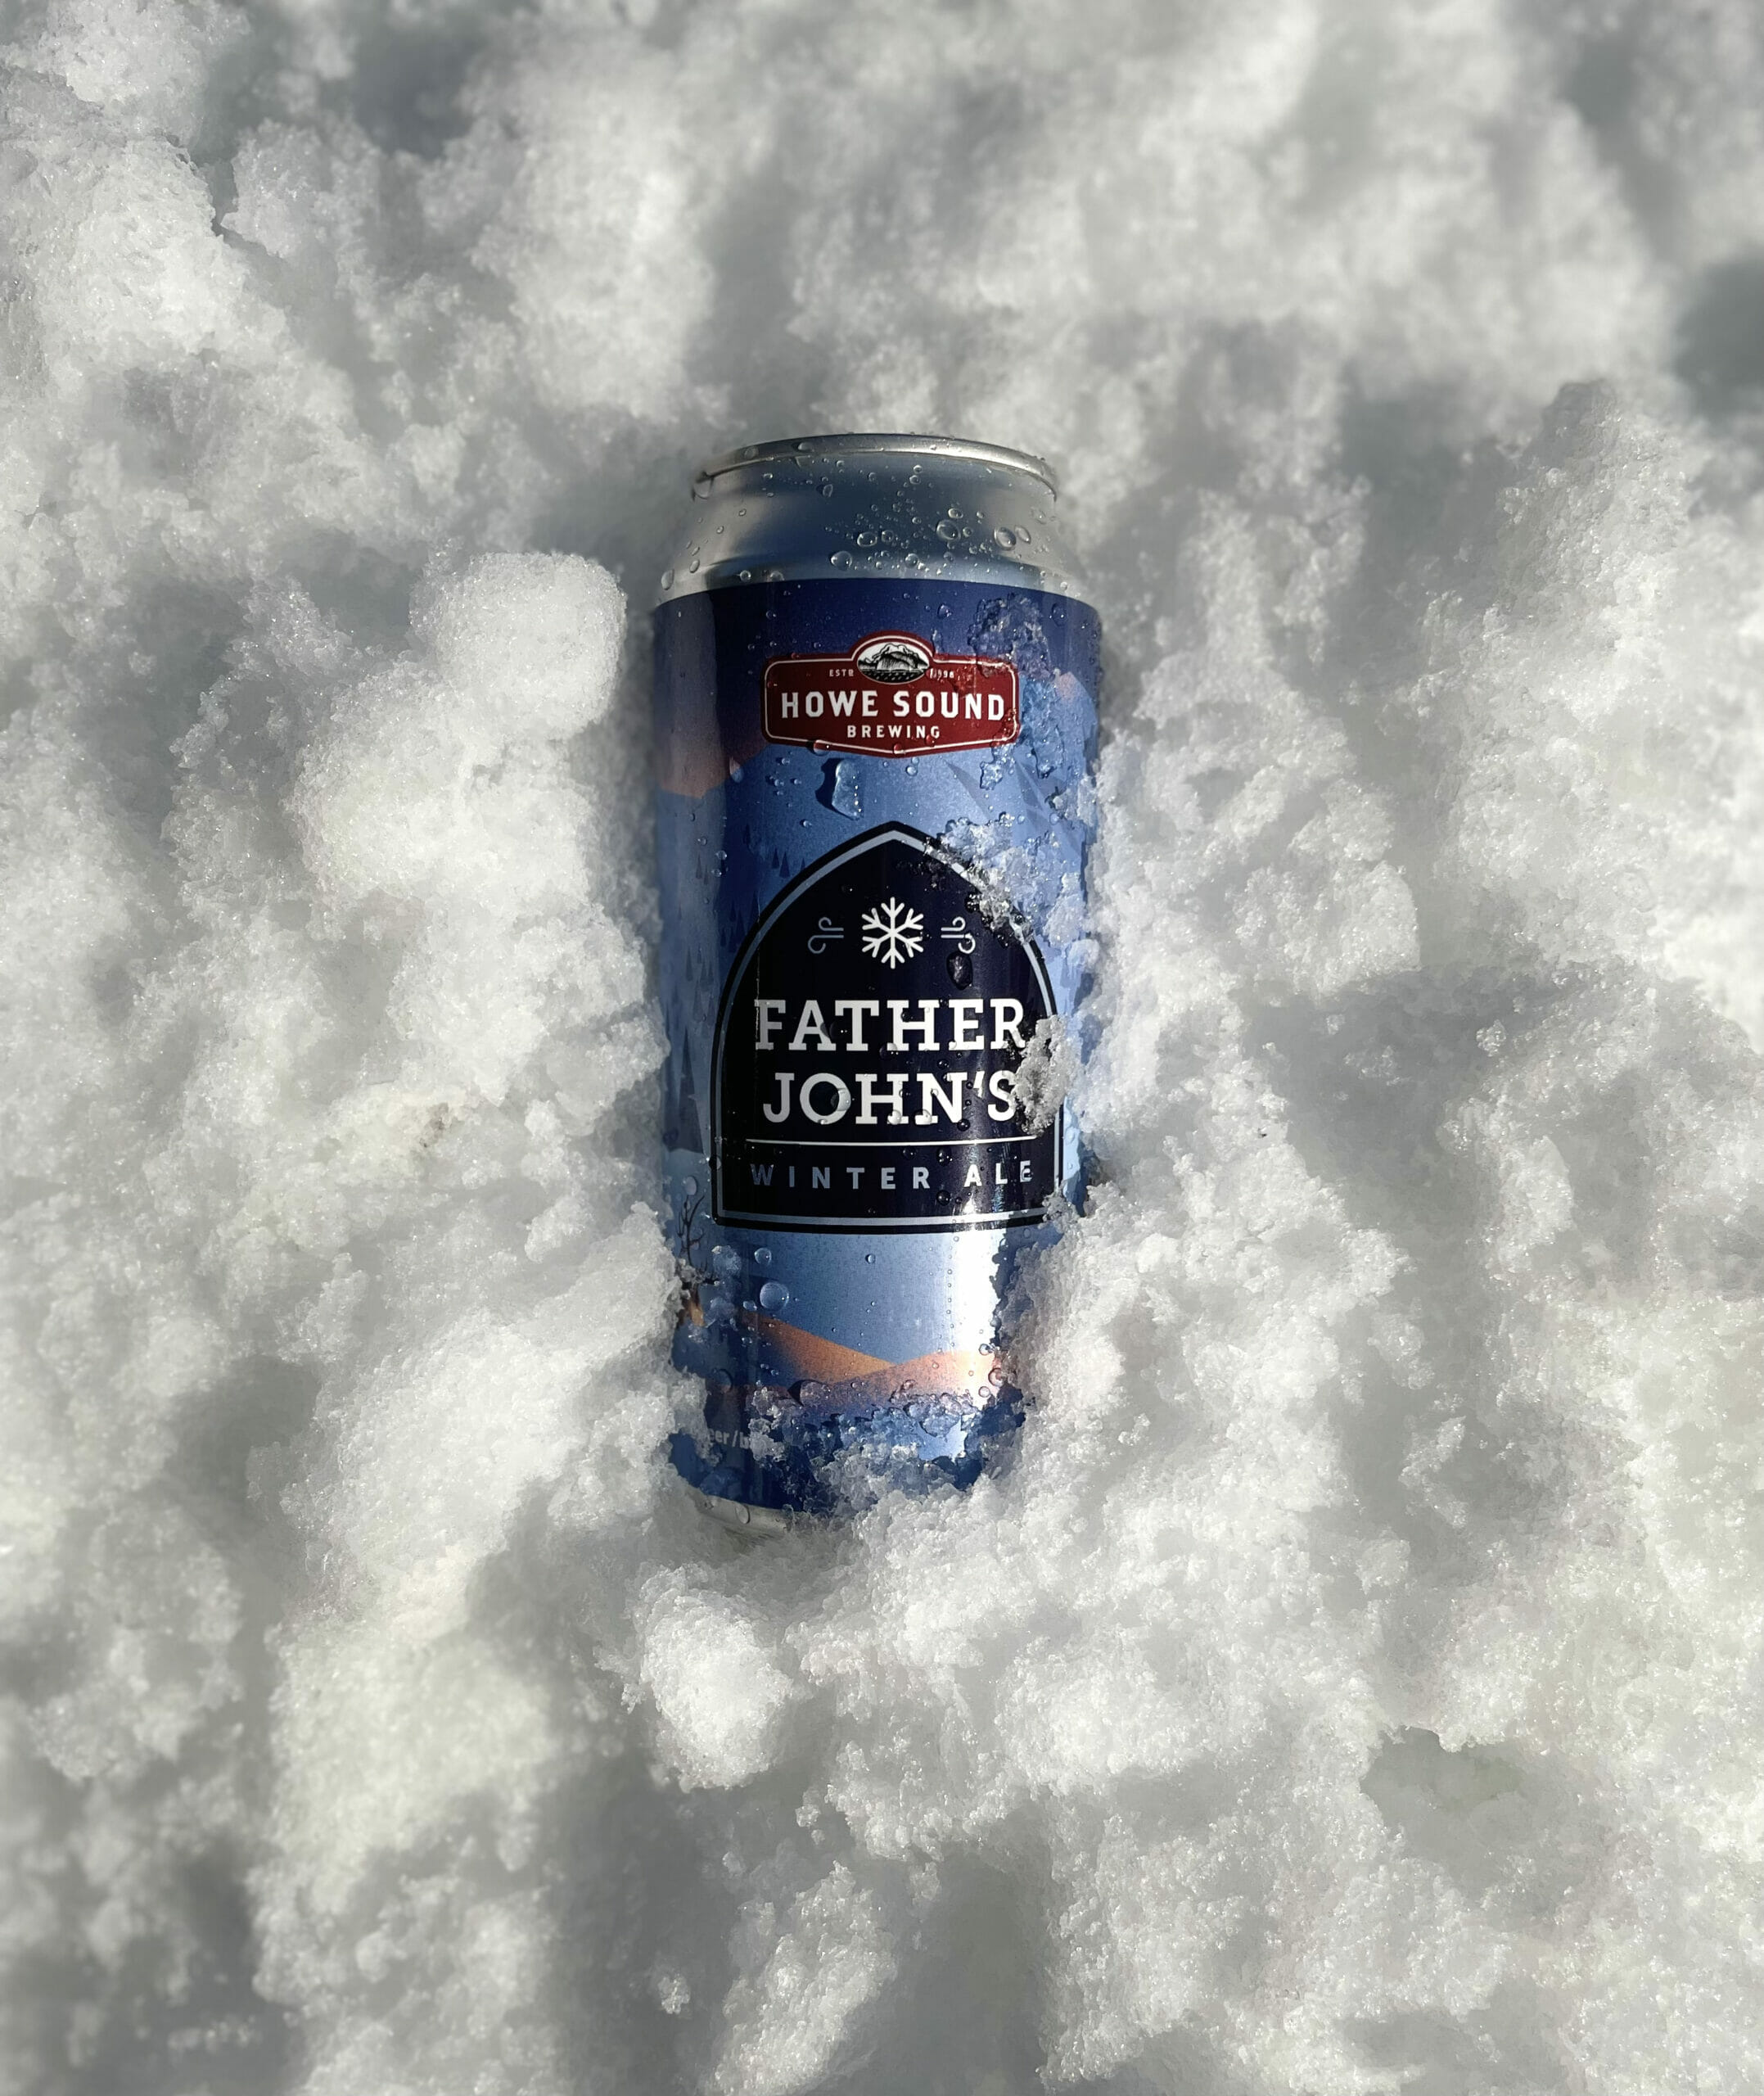 Father John's Winter Ale - Howe Sound Brewing